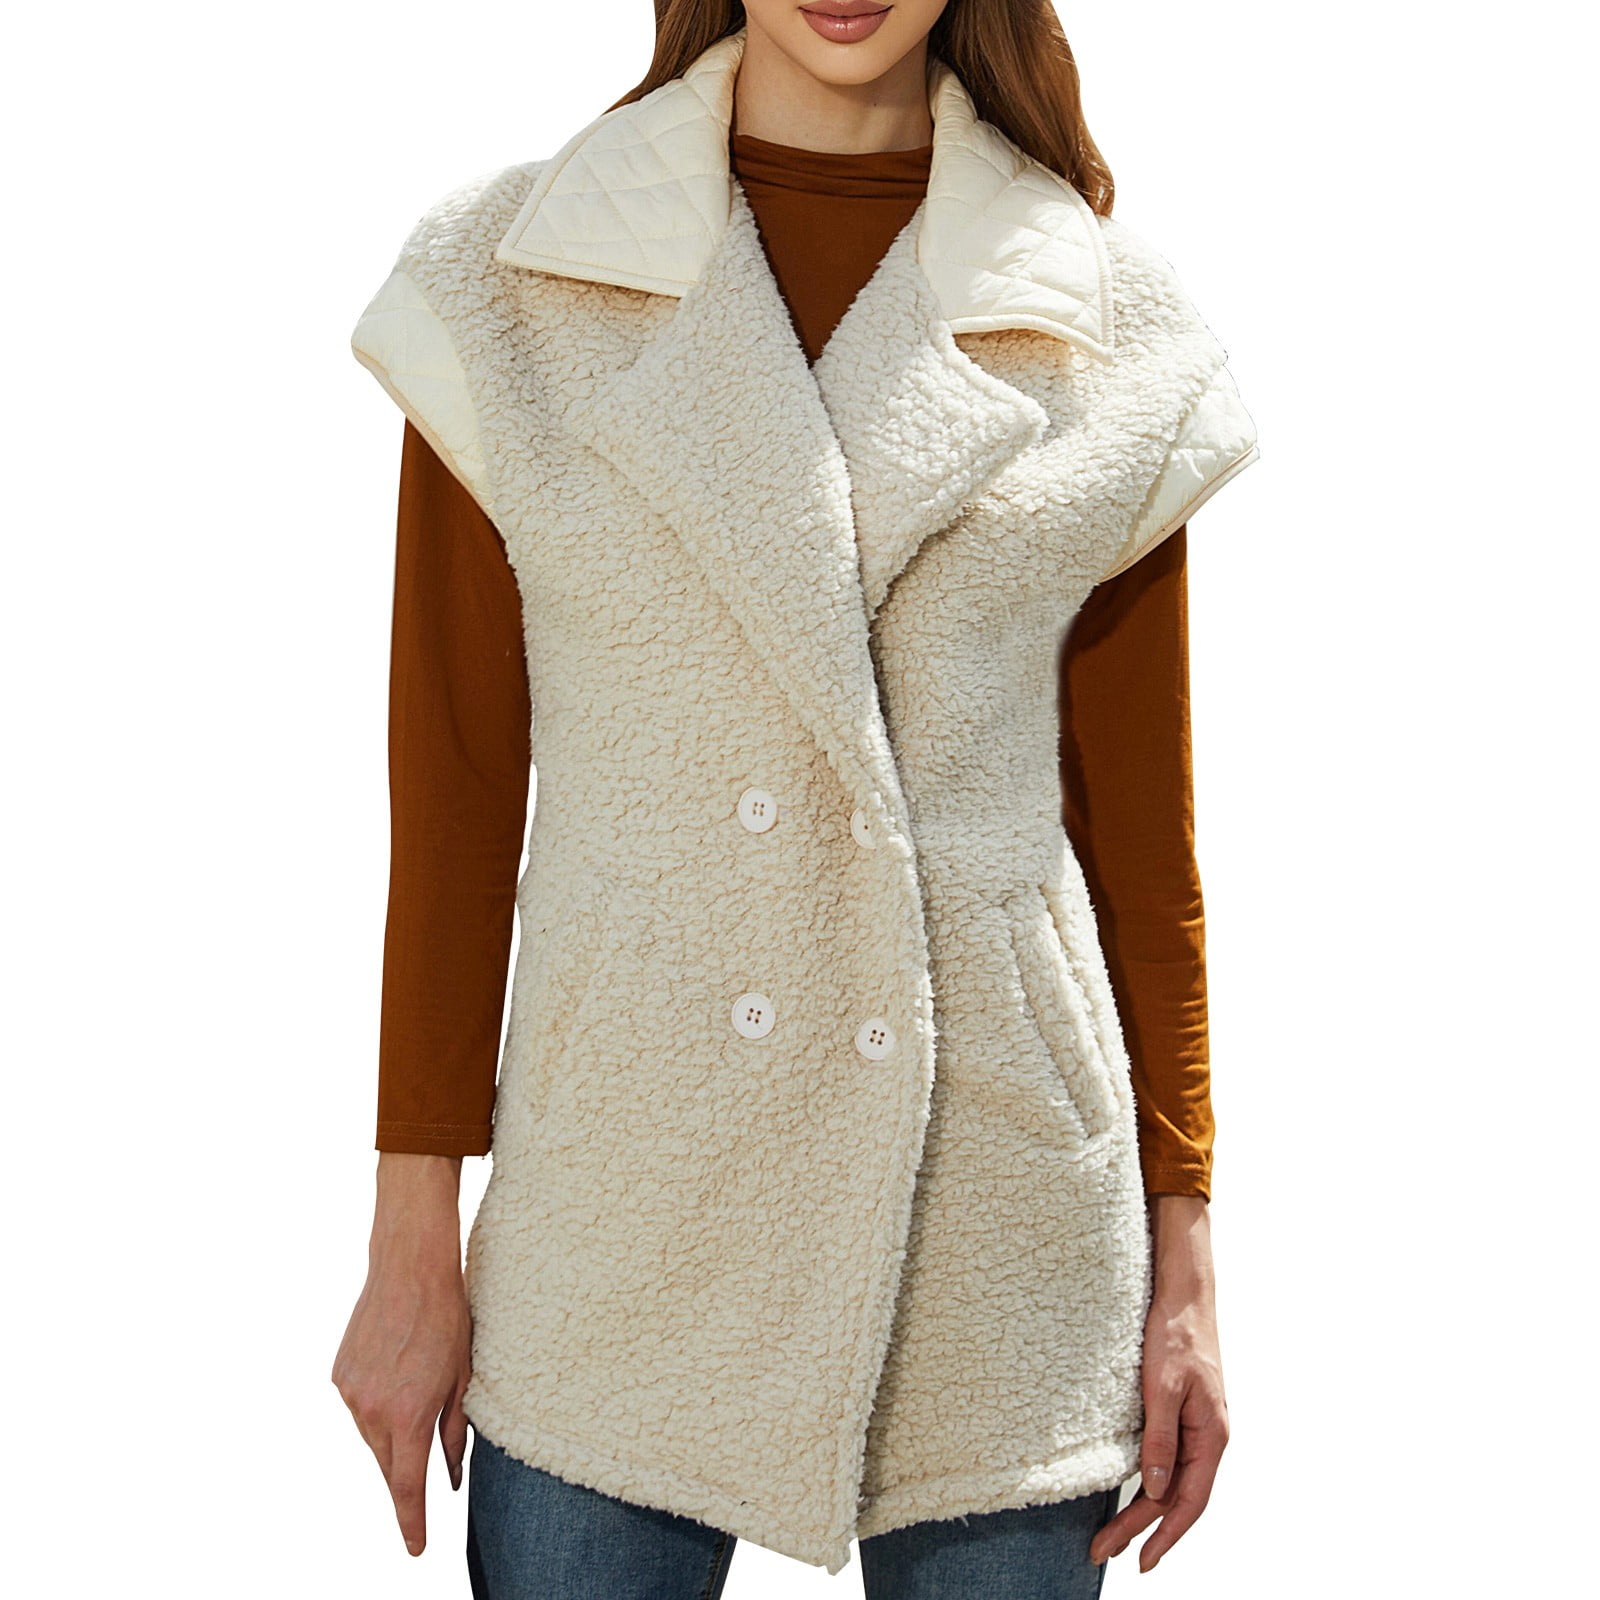 APEXFWDT Womens Fuzzy Fleece Vest Oversized Warm Button Down Sherpa Faux  Shearling Vest Casual Sleeveless Jacket with Pockets 